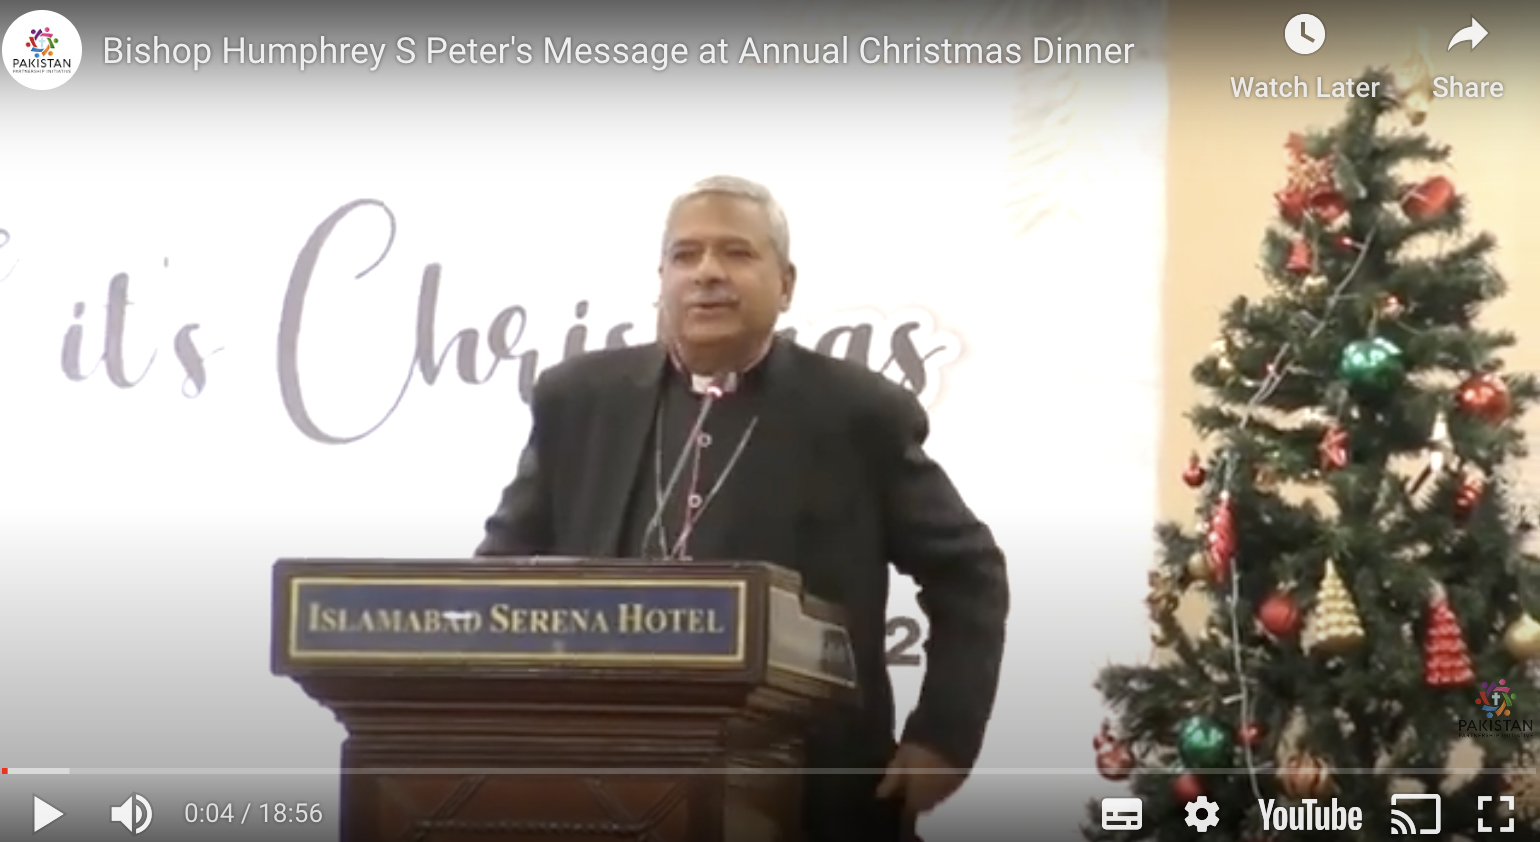 Bishop Humphrey S  Peter's Message at Annual Christmas Dinner